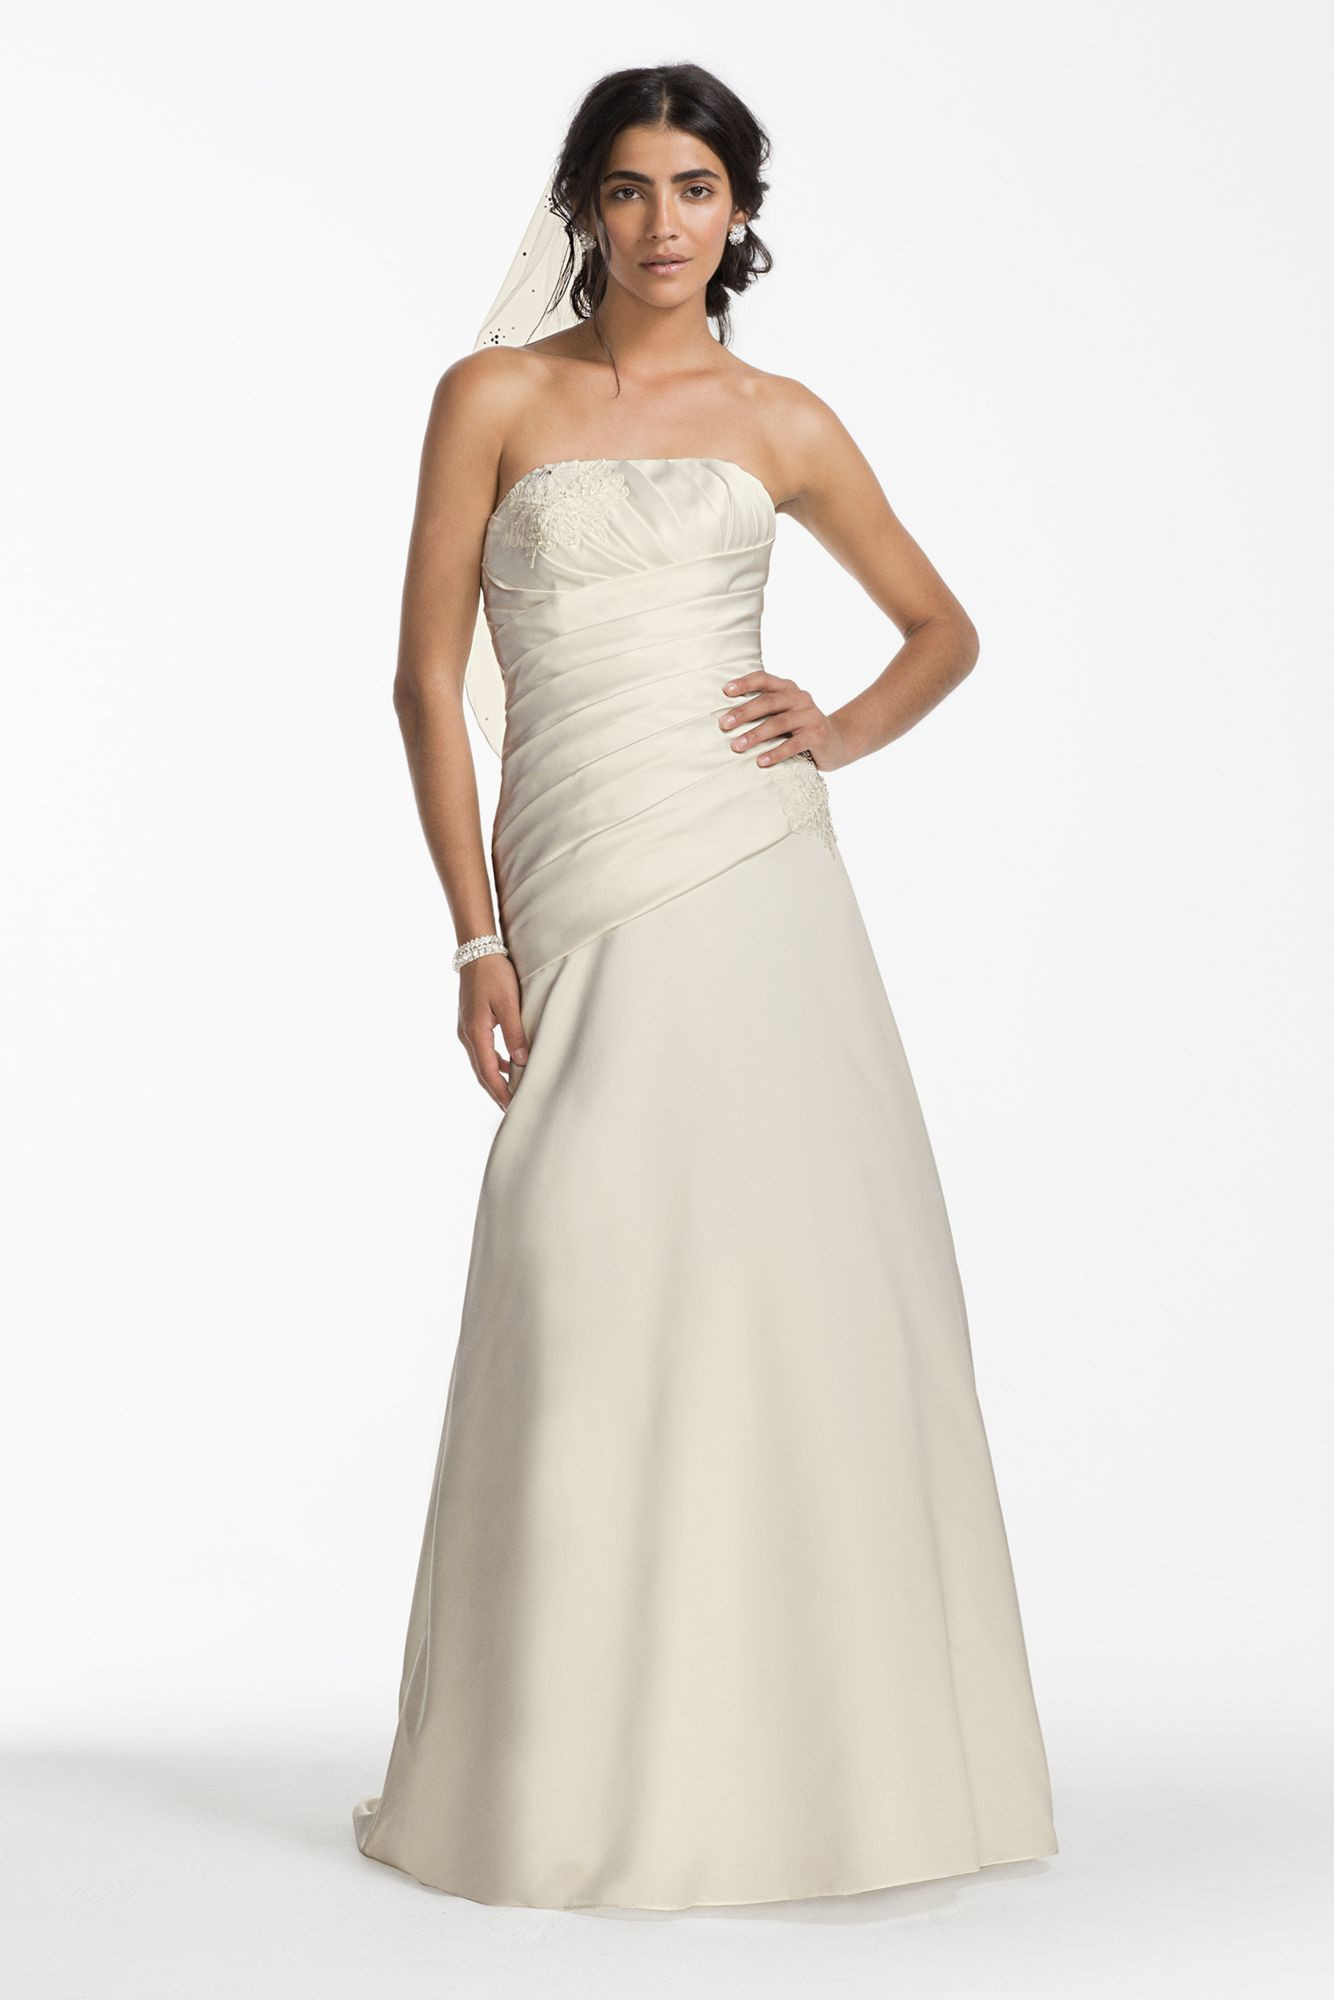 Ruched Wedding Gowns
 Satin A line Wedding Dress with Ruched Bodice Style OP1255